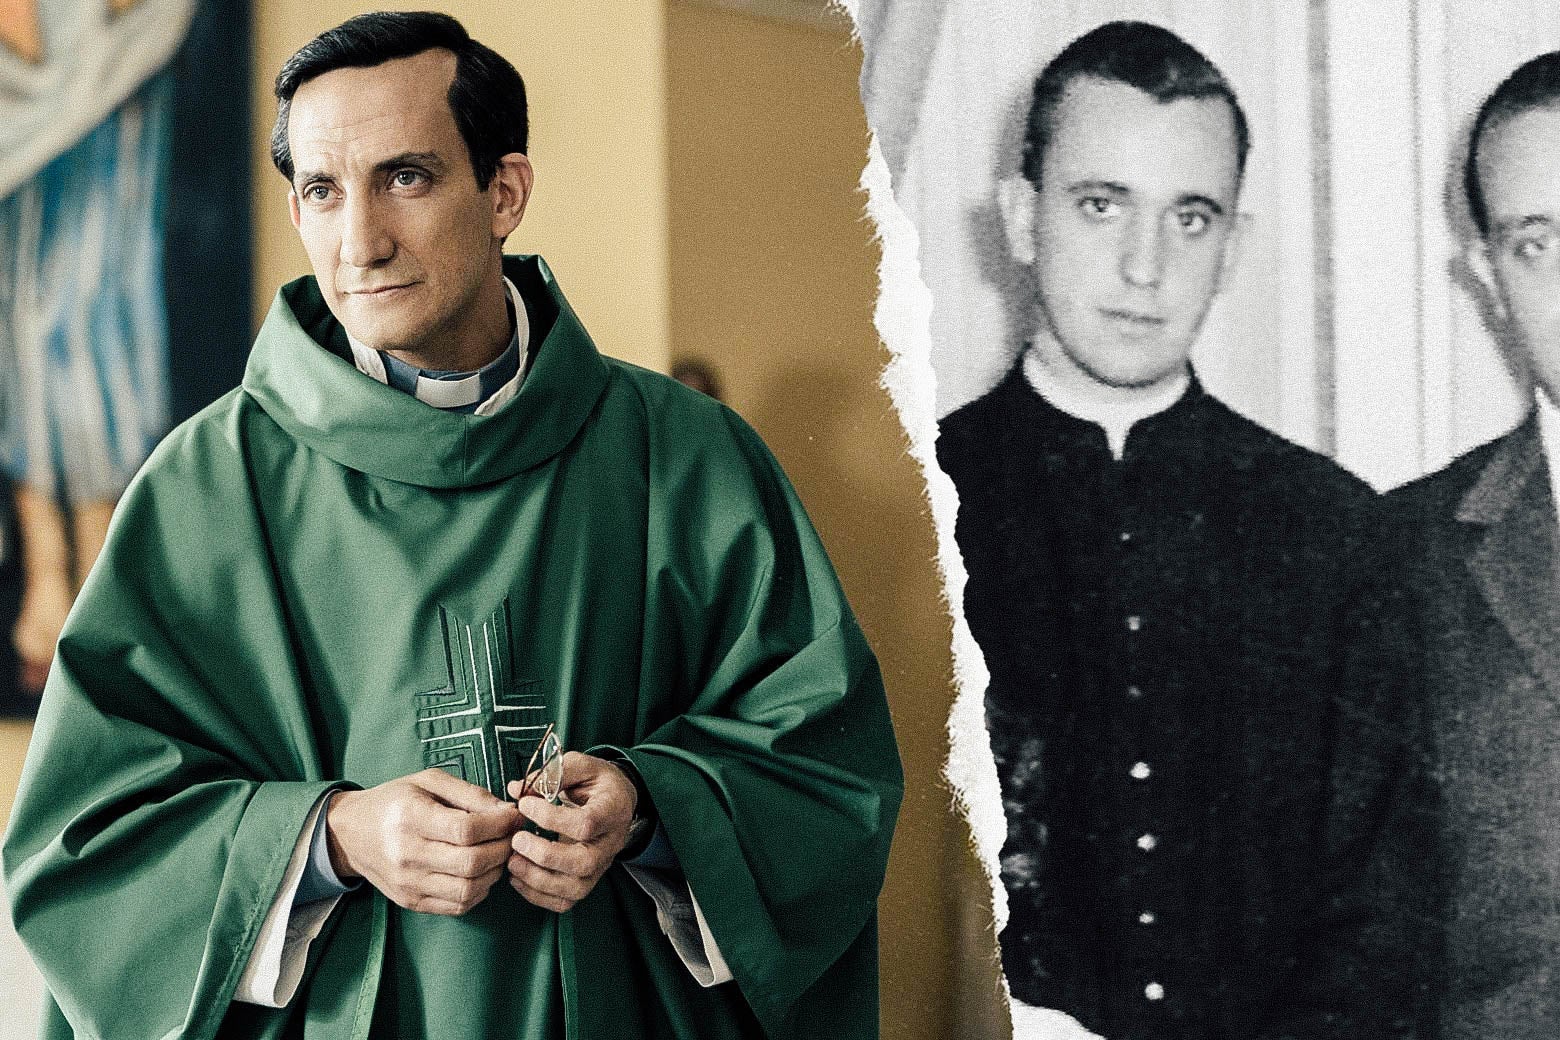 Juan Minujín as young Jorge Mario Bergoglio in The Two Popes; undated photo of the real Bergoglio.